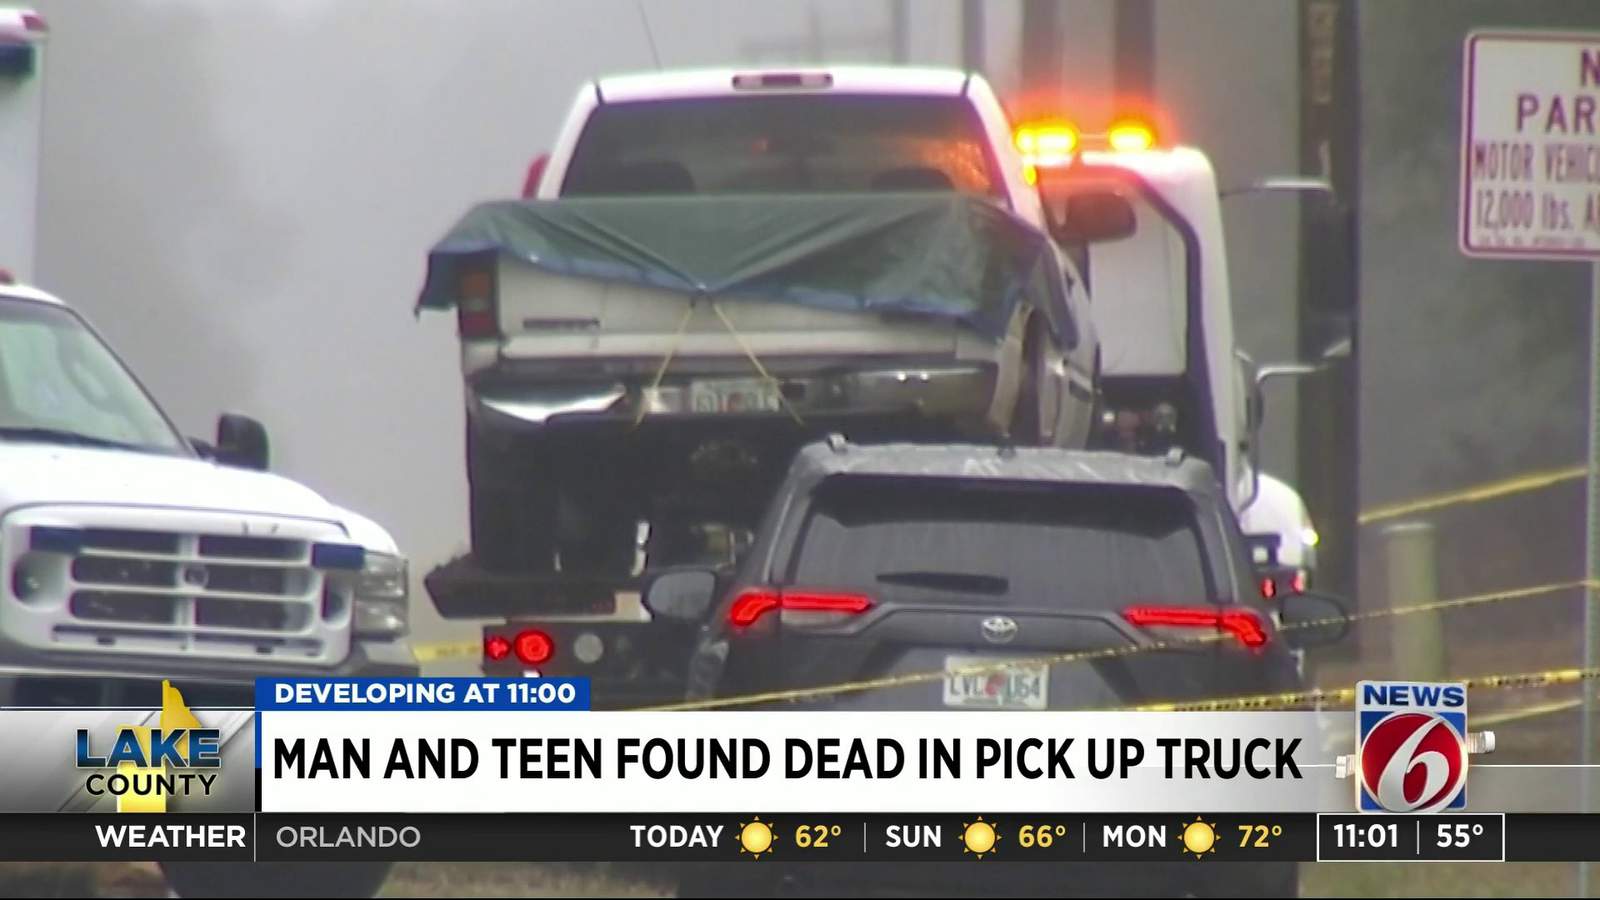 Man and teen found dead in pick up truck